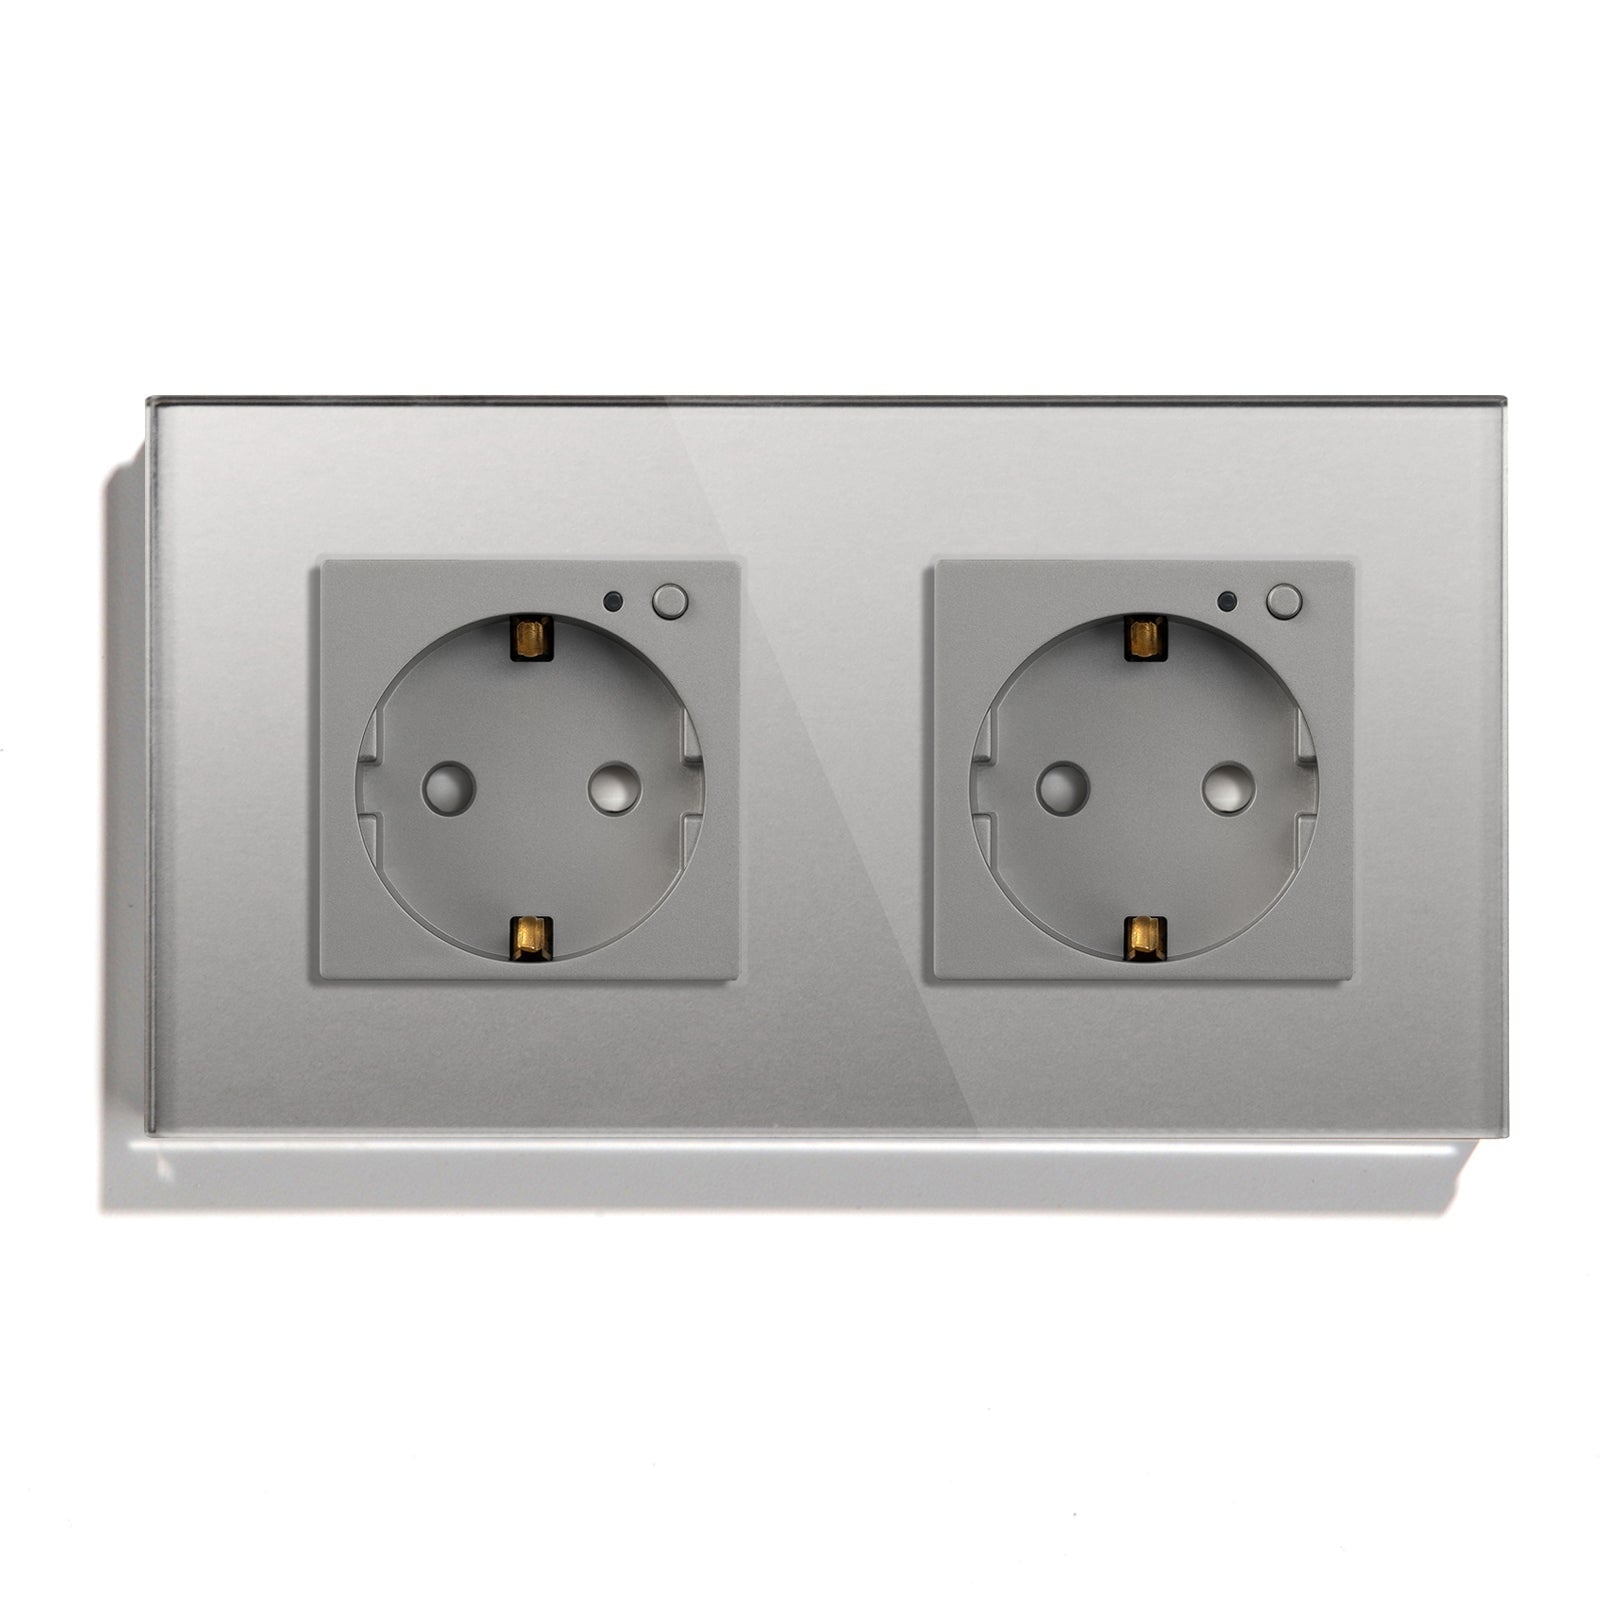 BSEED ZigBee EU Wall Sockets Power Outlets Kids Protection Wall Plates & Covers Bseedswitch grey Double 